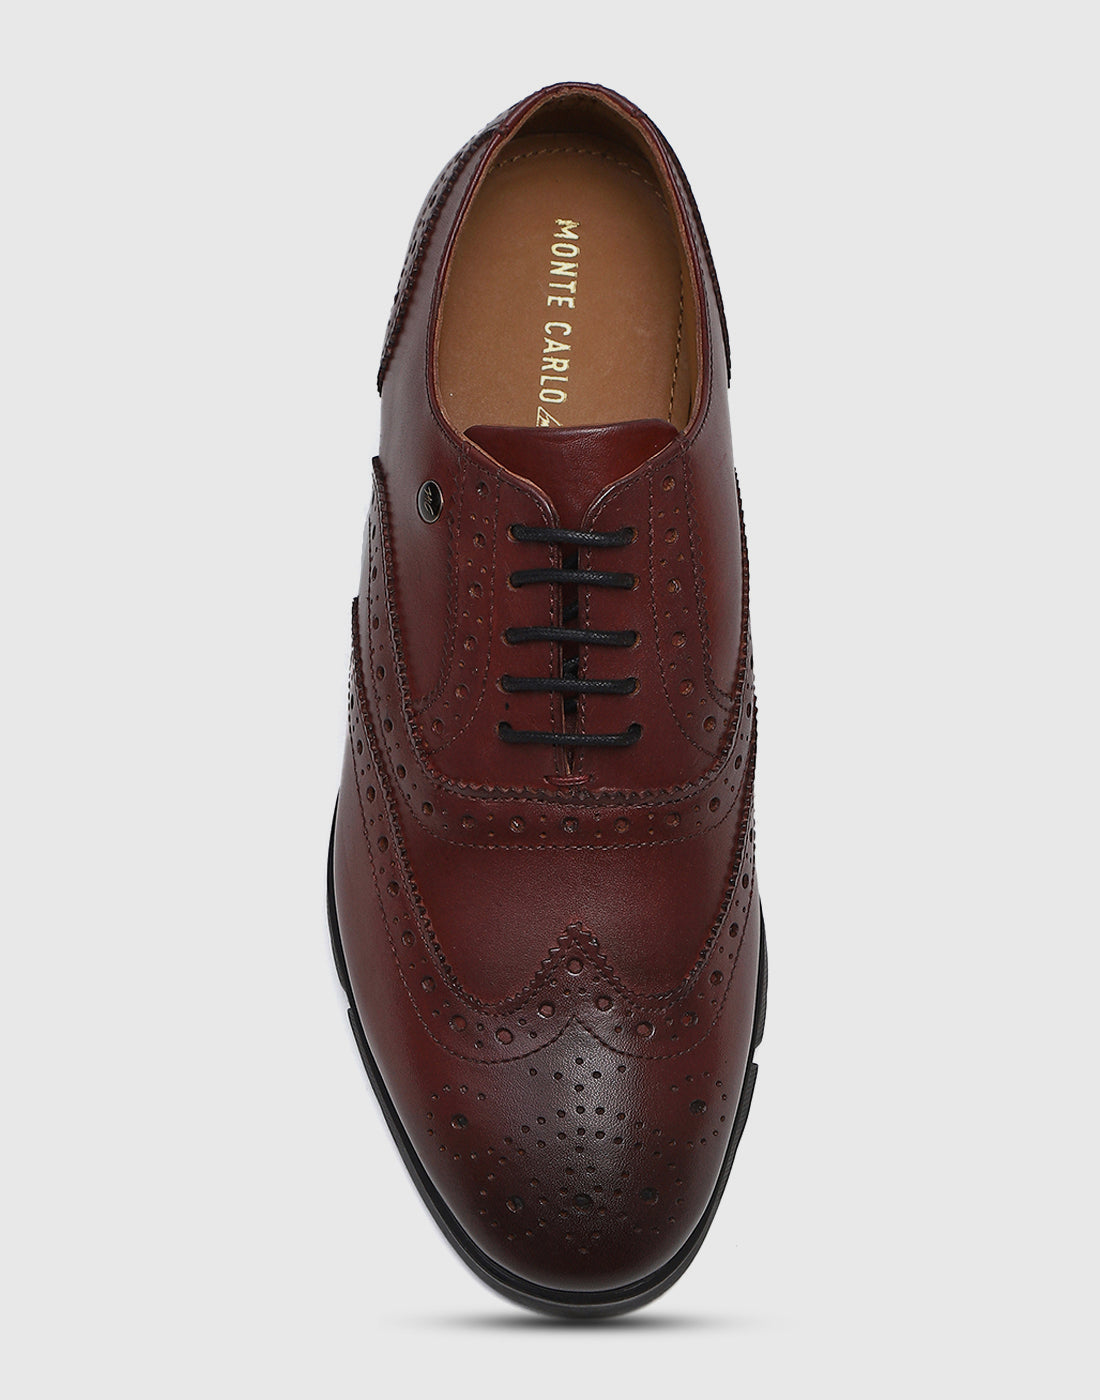 Men Burgundy Lace Up Genuine Leather Formal Brogues